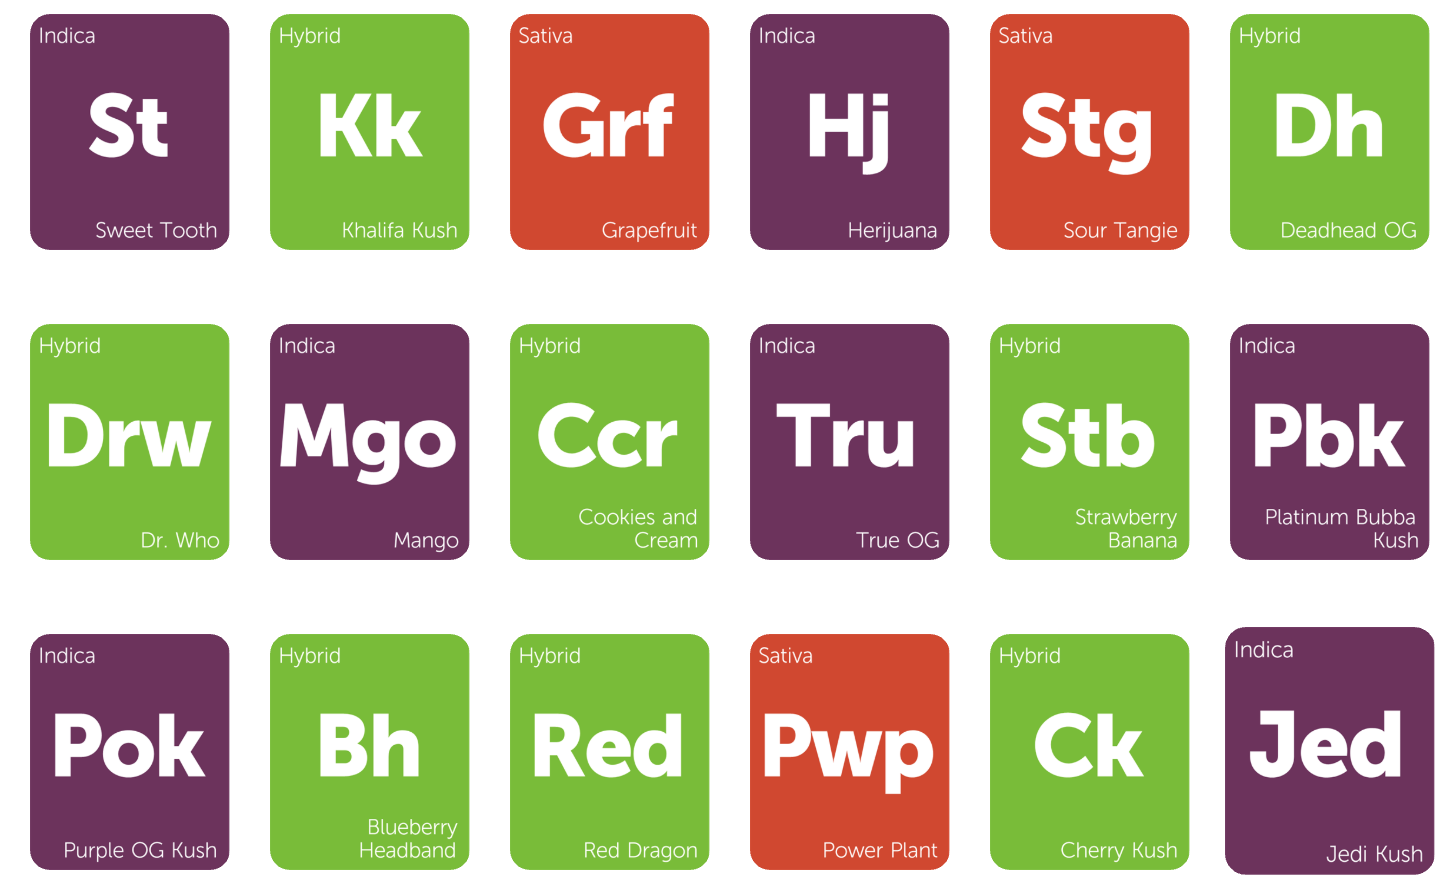 Leafly colored tags